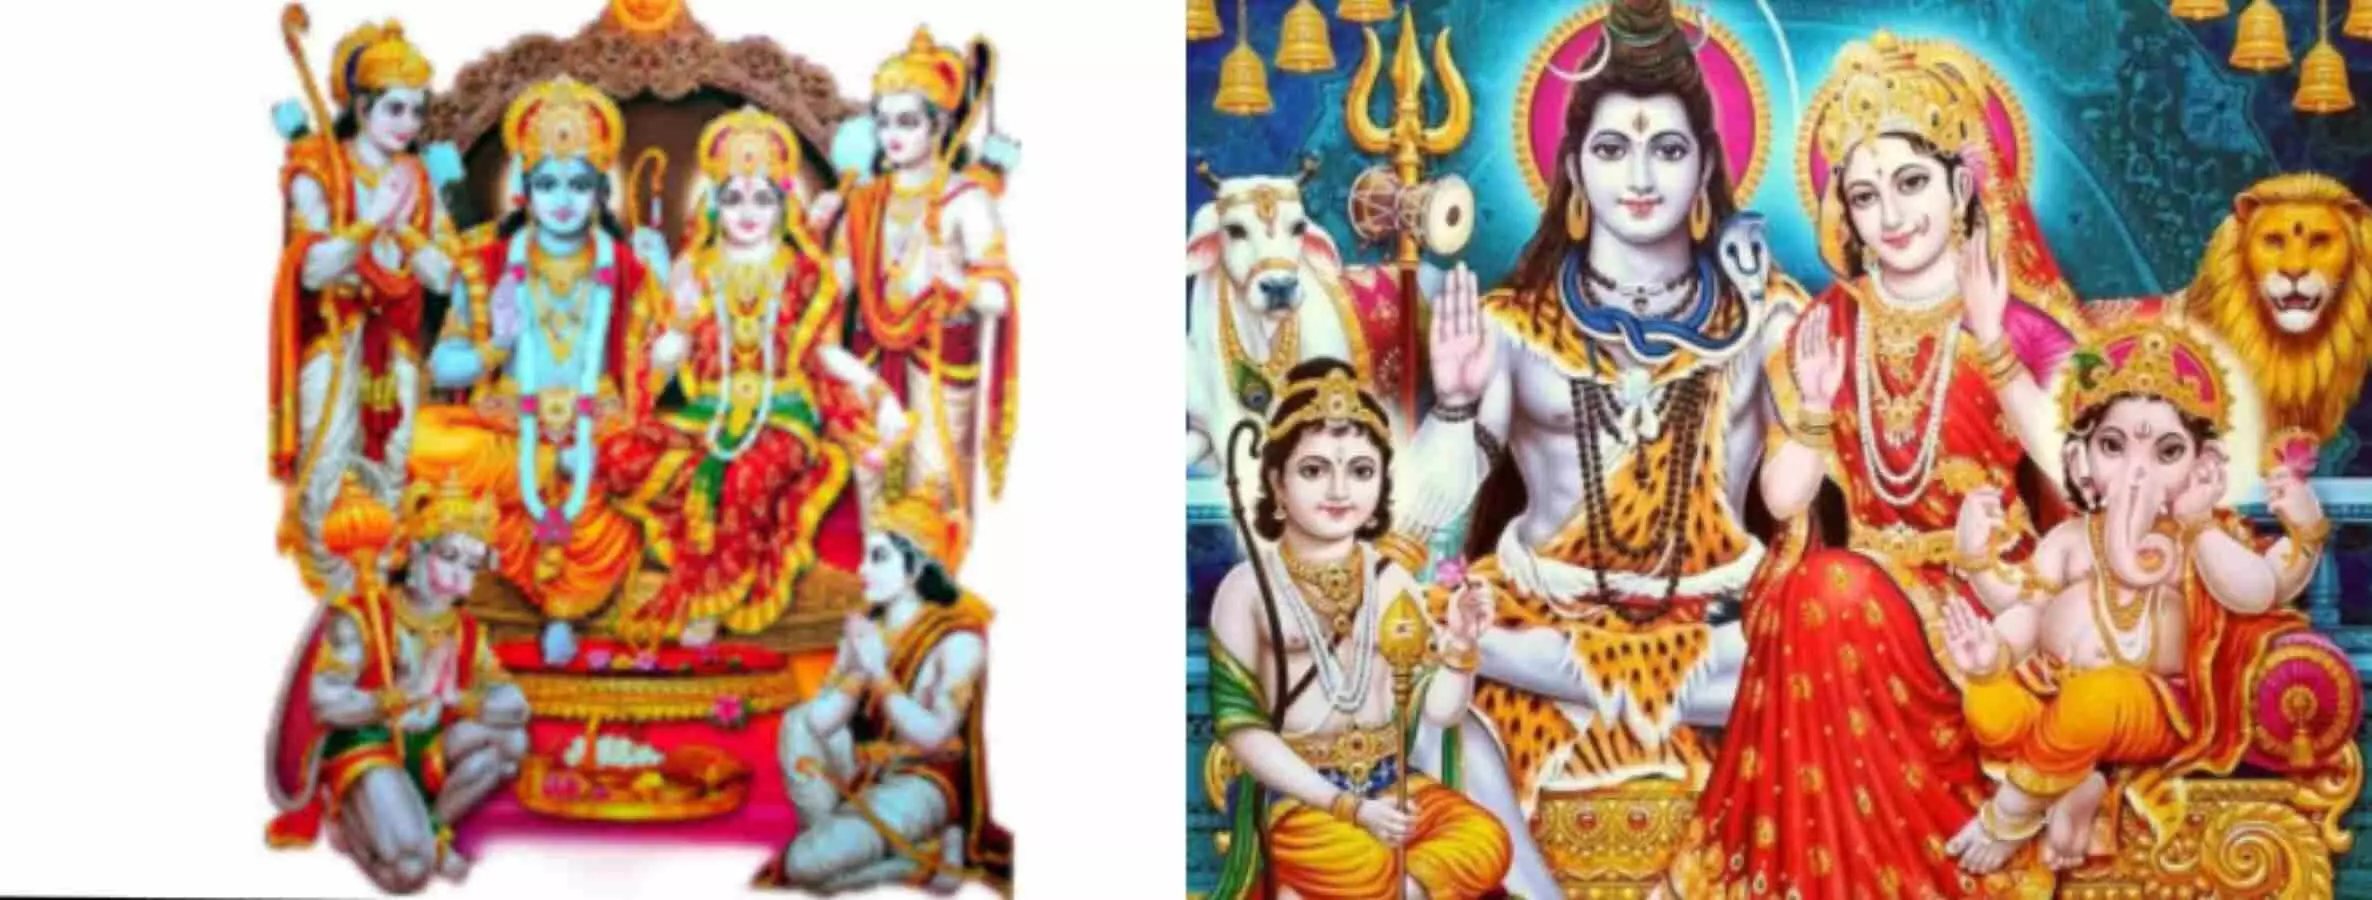 Lord Shiva and Family